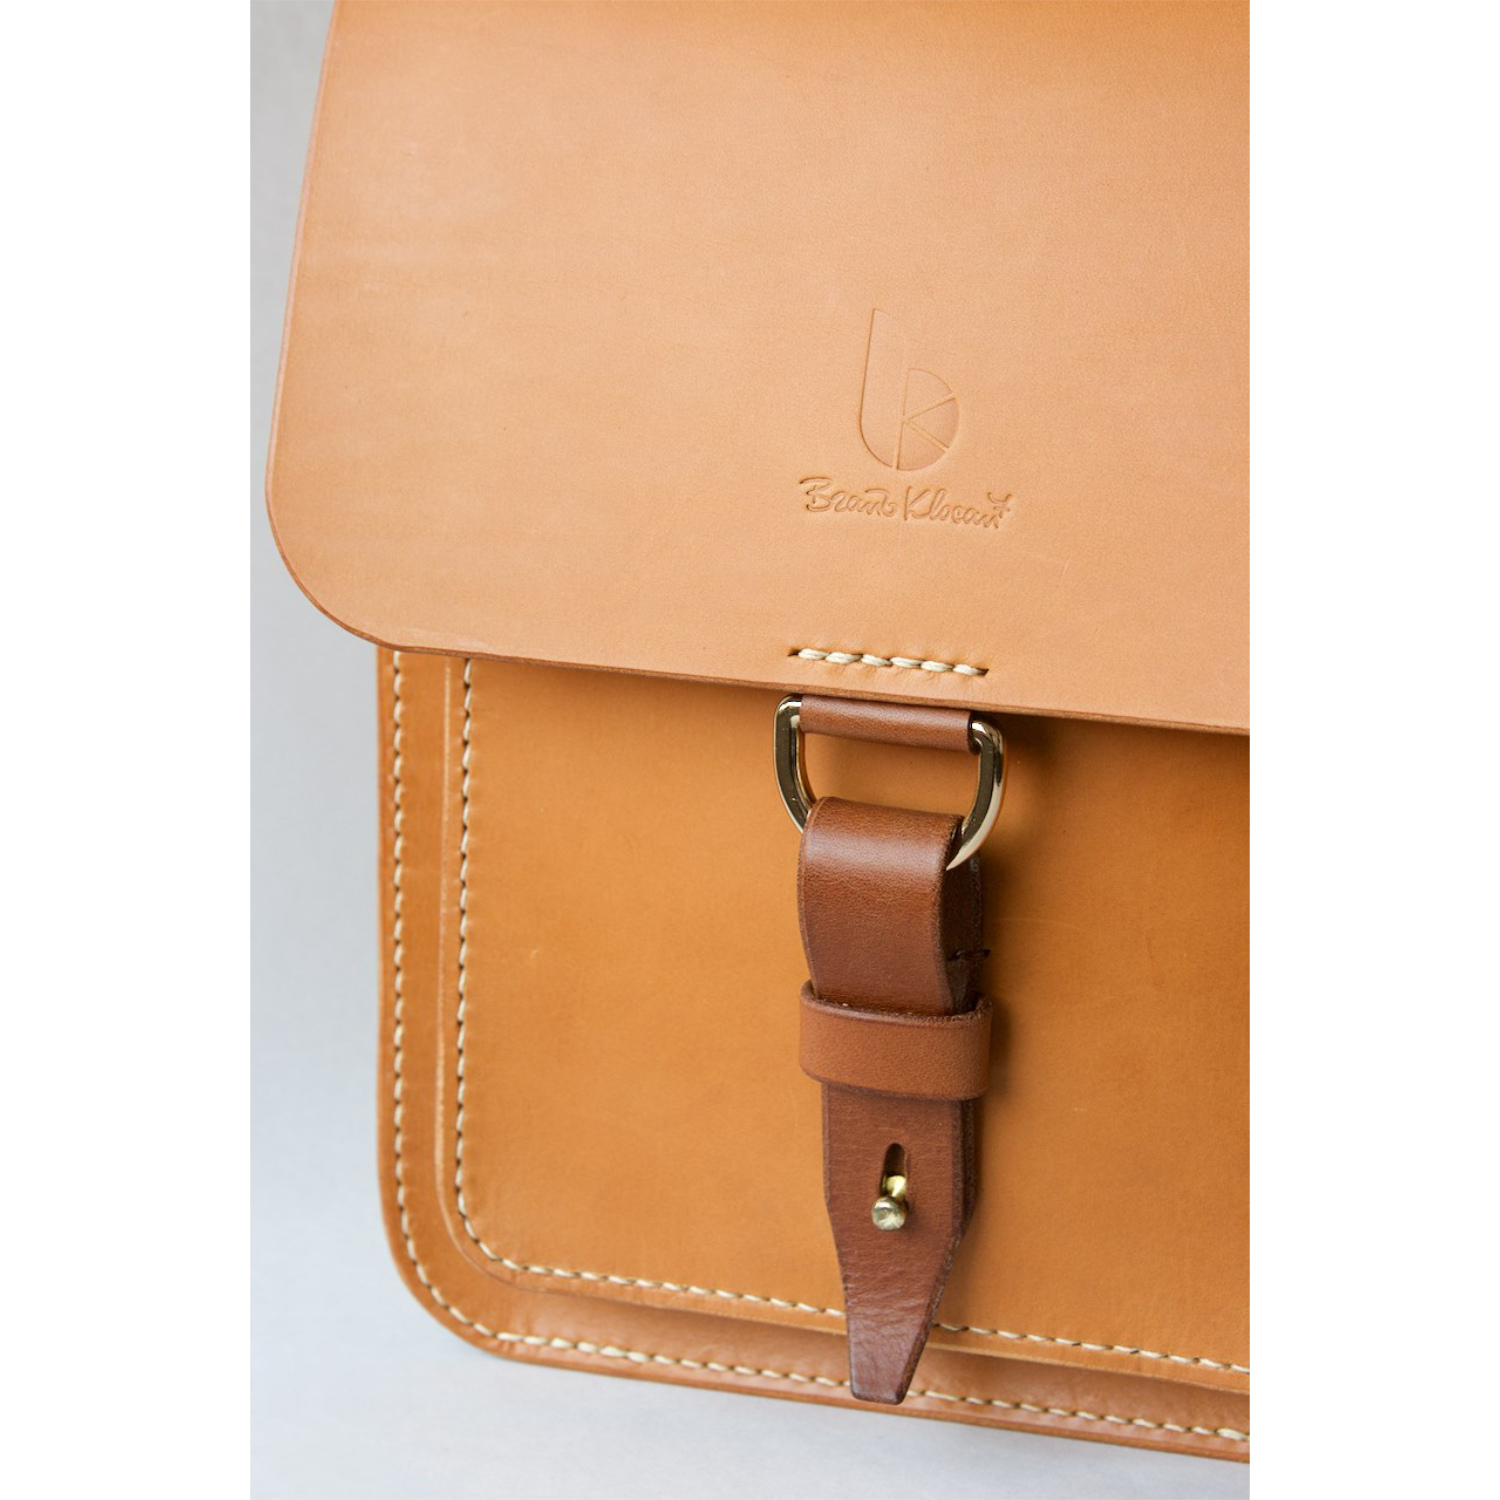 leather messenger bag with strap and dring closure detail